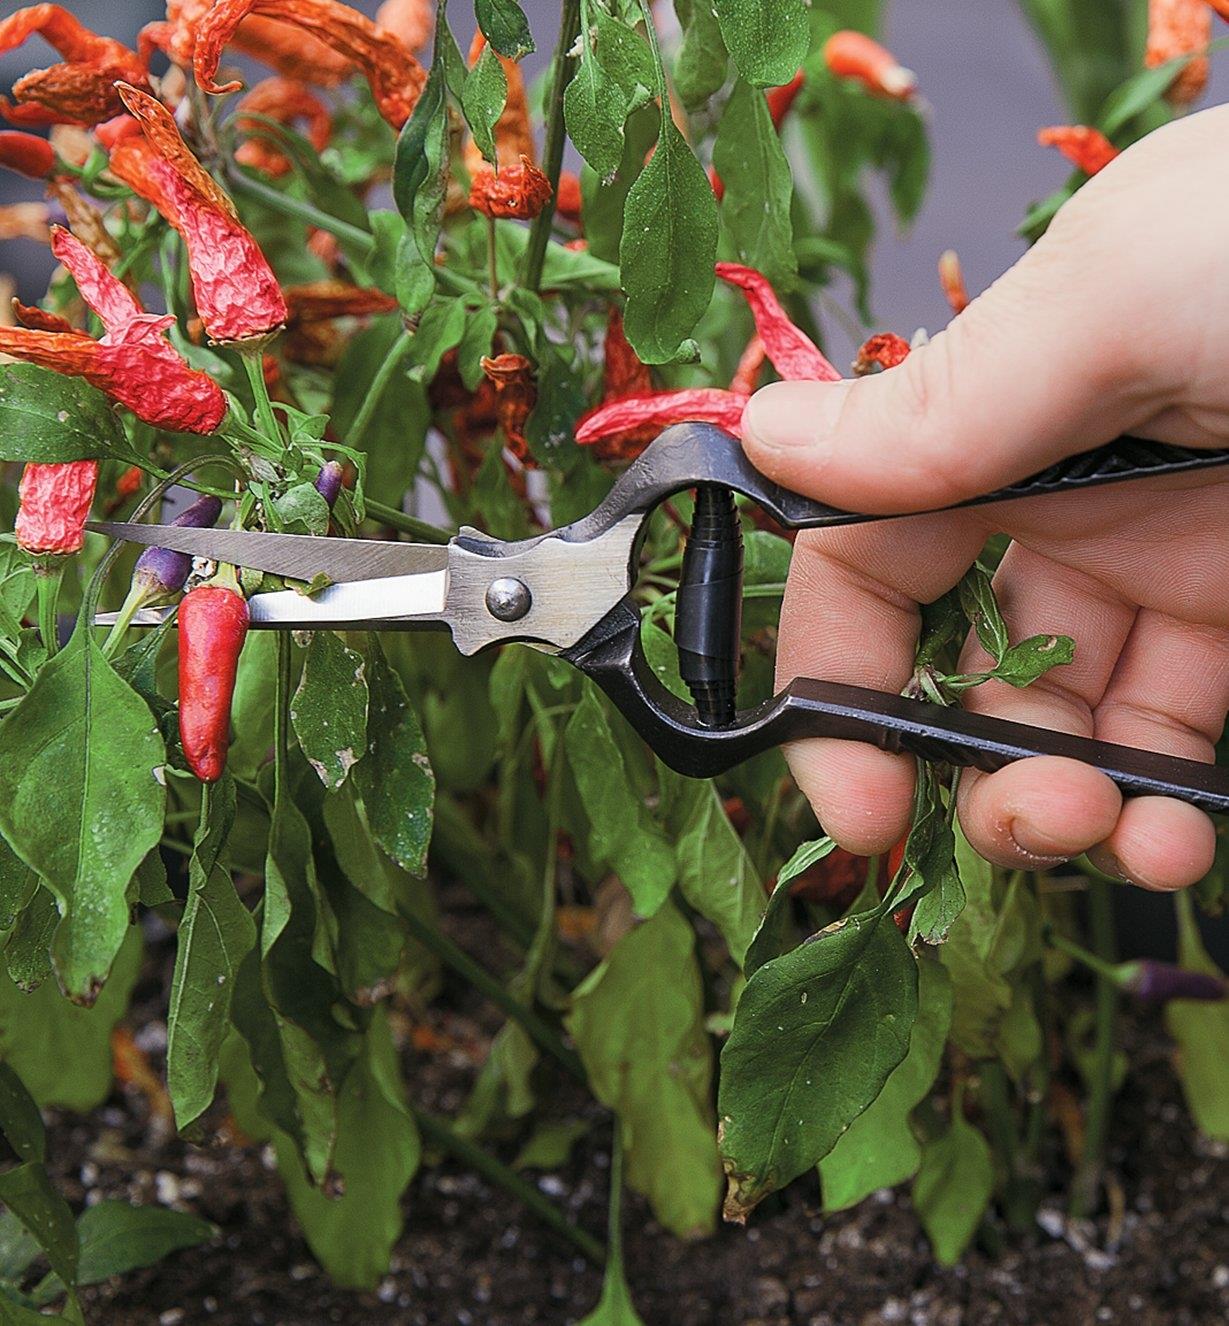 Harvesting peppers with Forged Flower Snips